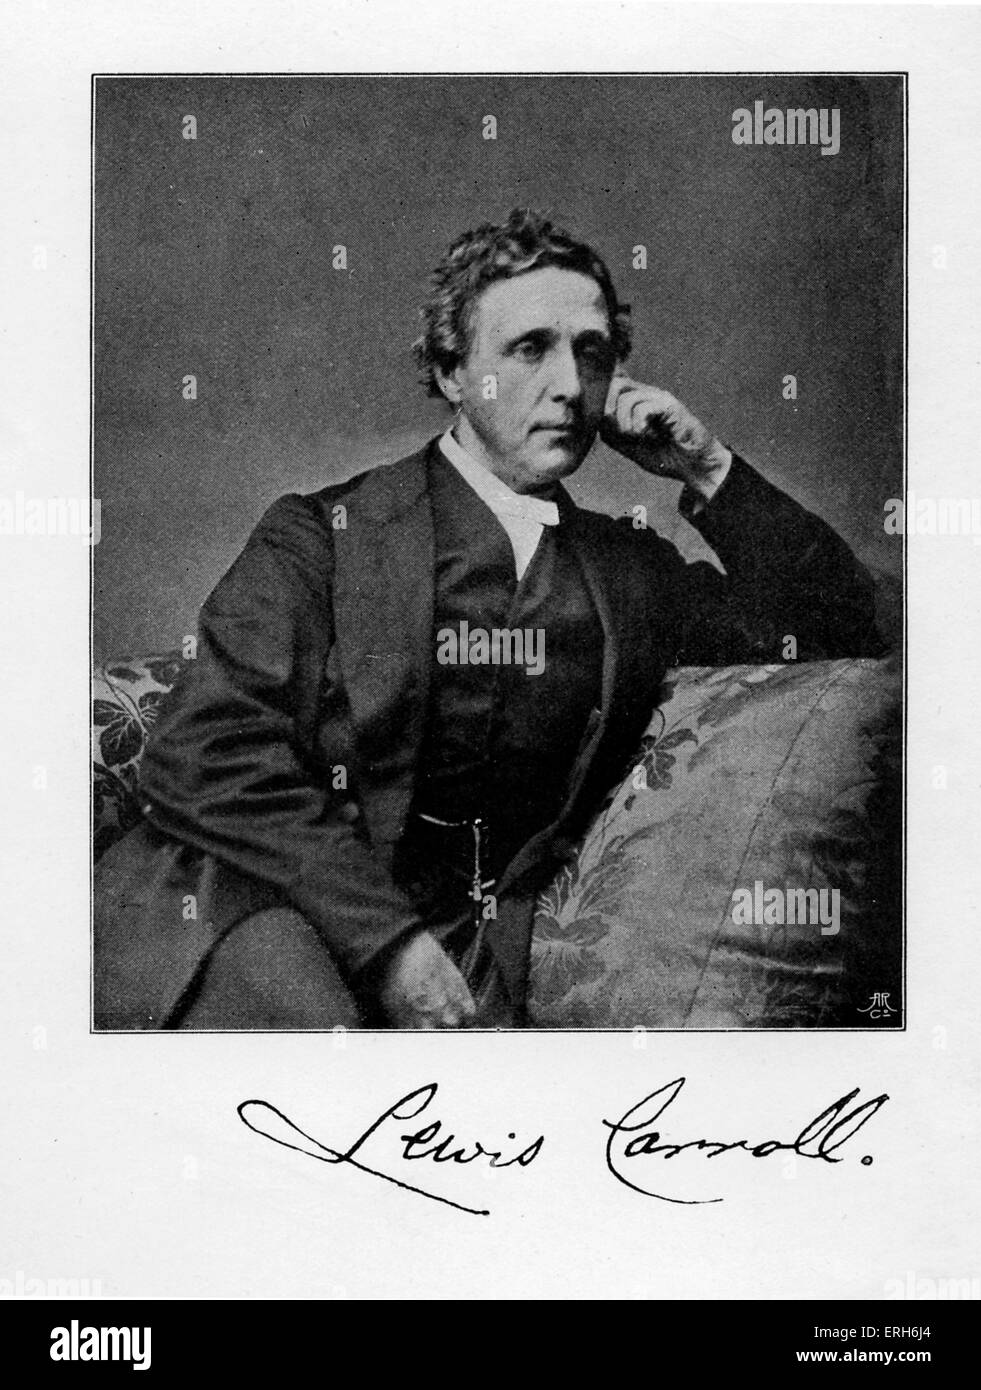 Lewis Carroll - portrait. (Real name Reverend Charles Lutwidge Dodgson) English author: 27 January 1832 - 14 January 1898. With Stock Photo